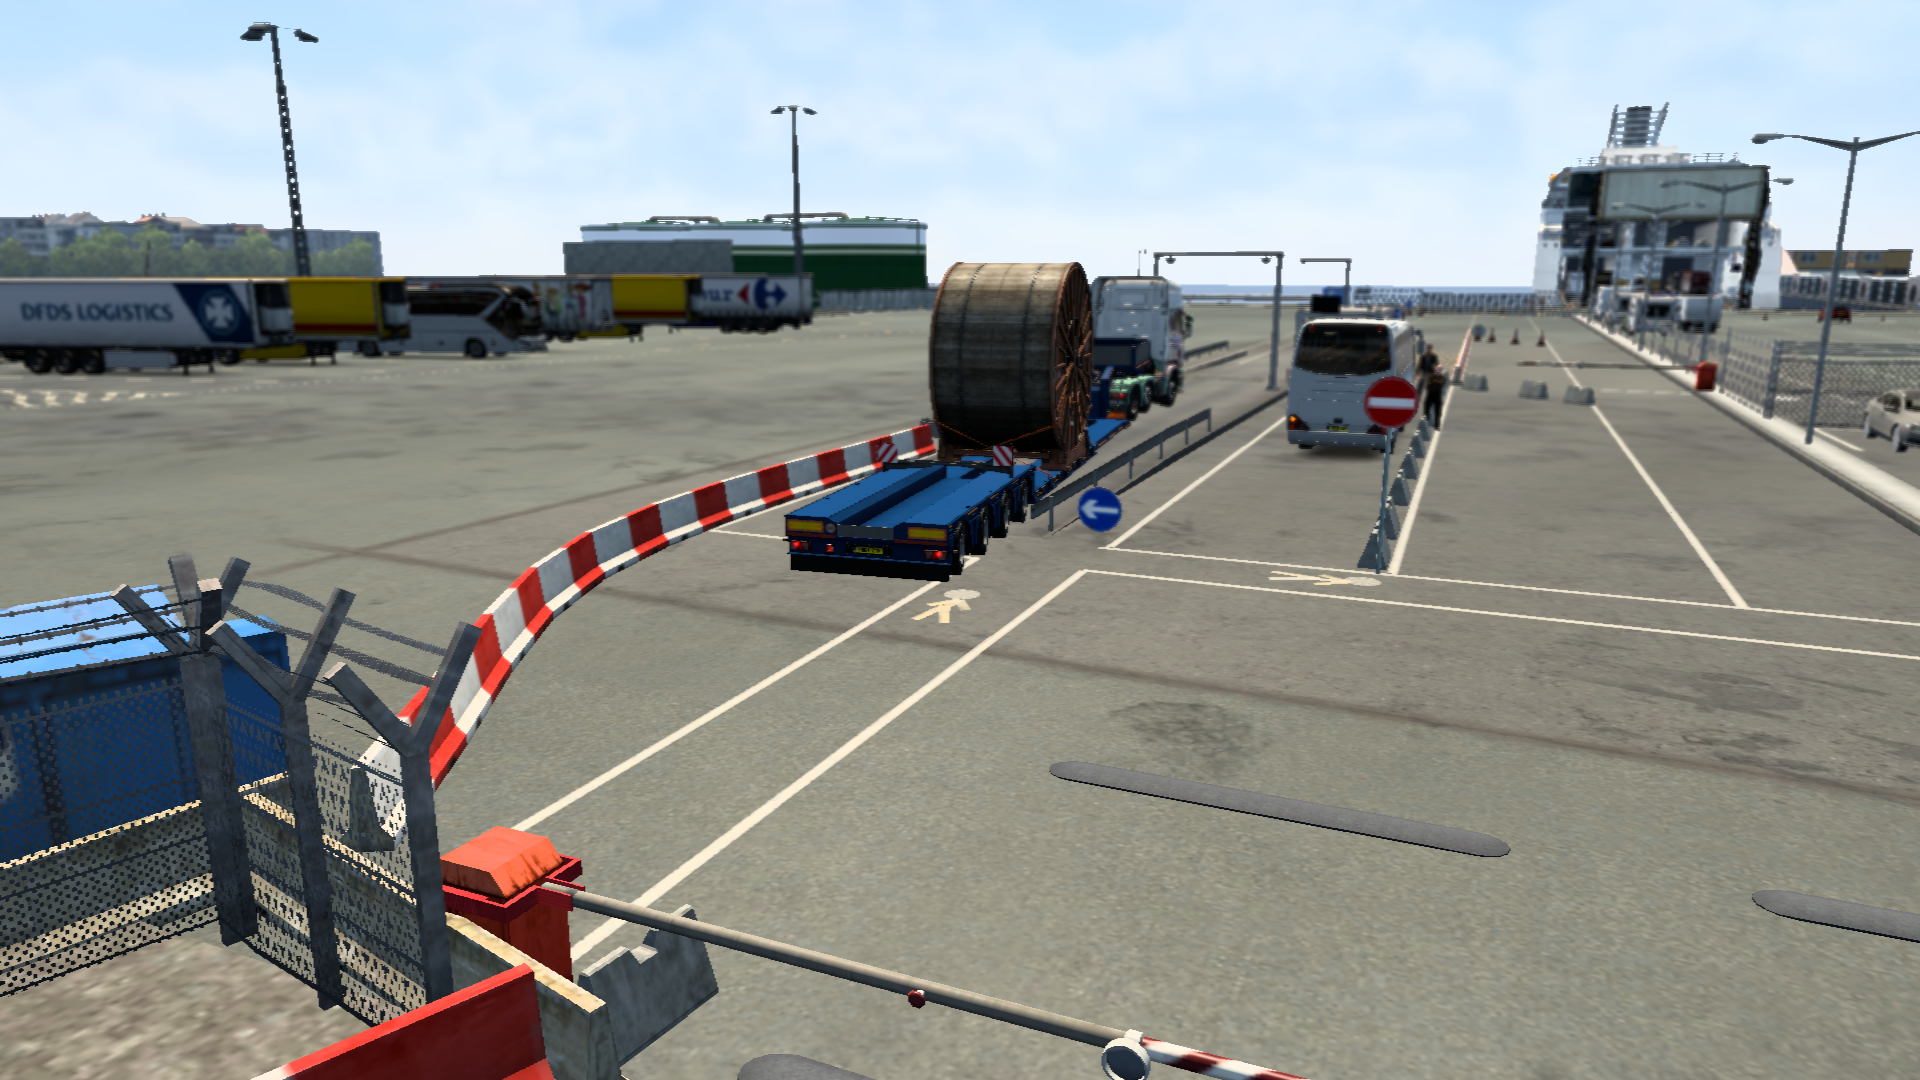 ets2_20211102_234730_00.png